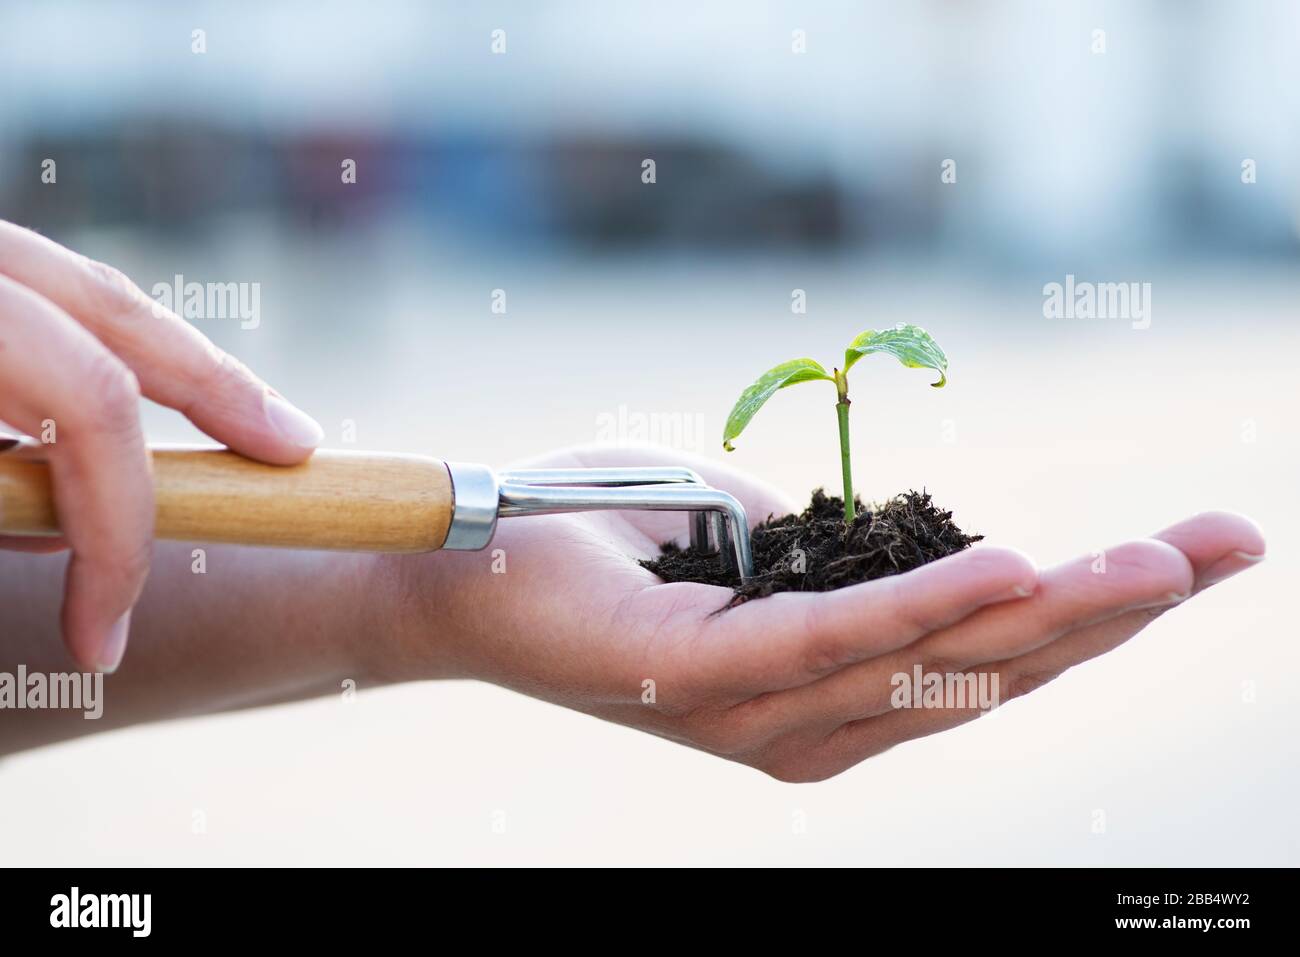 A hand holds soil with a young plant, houses in the background Stock Photo